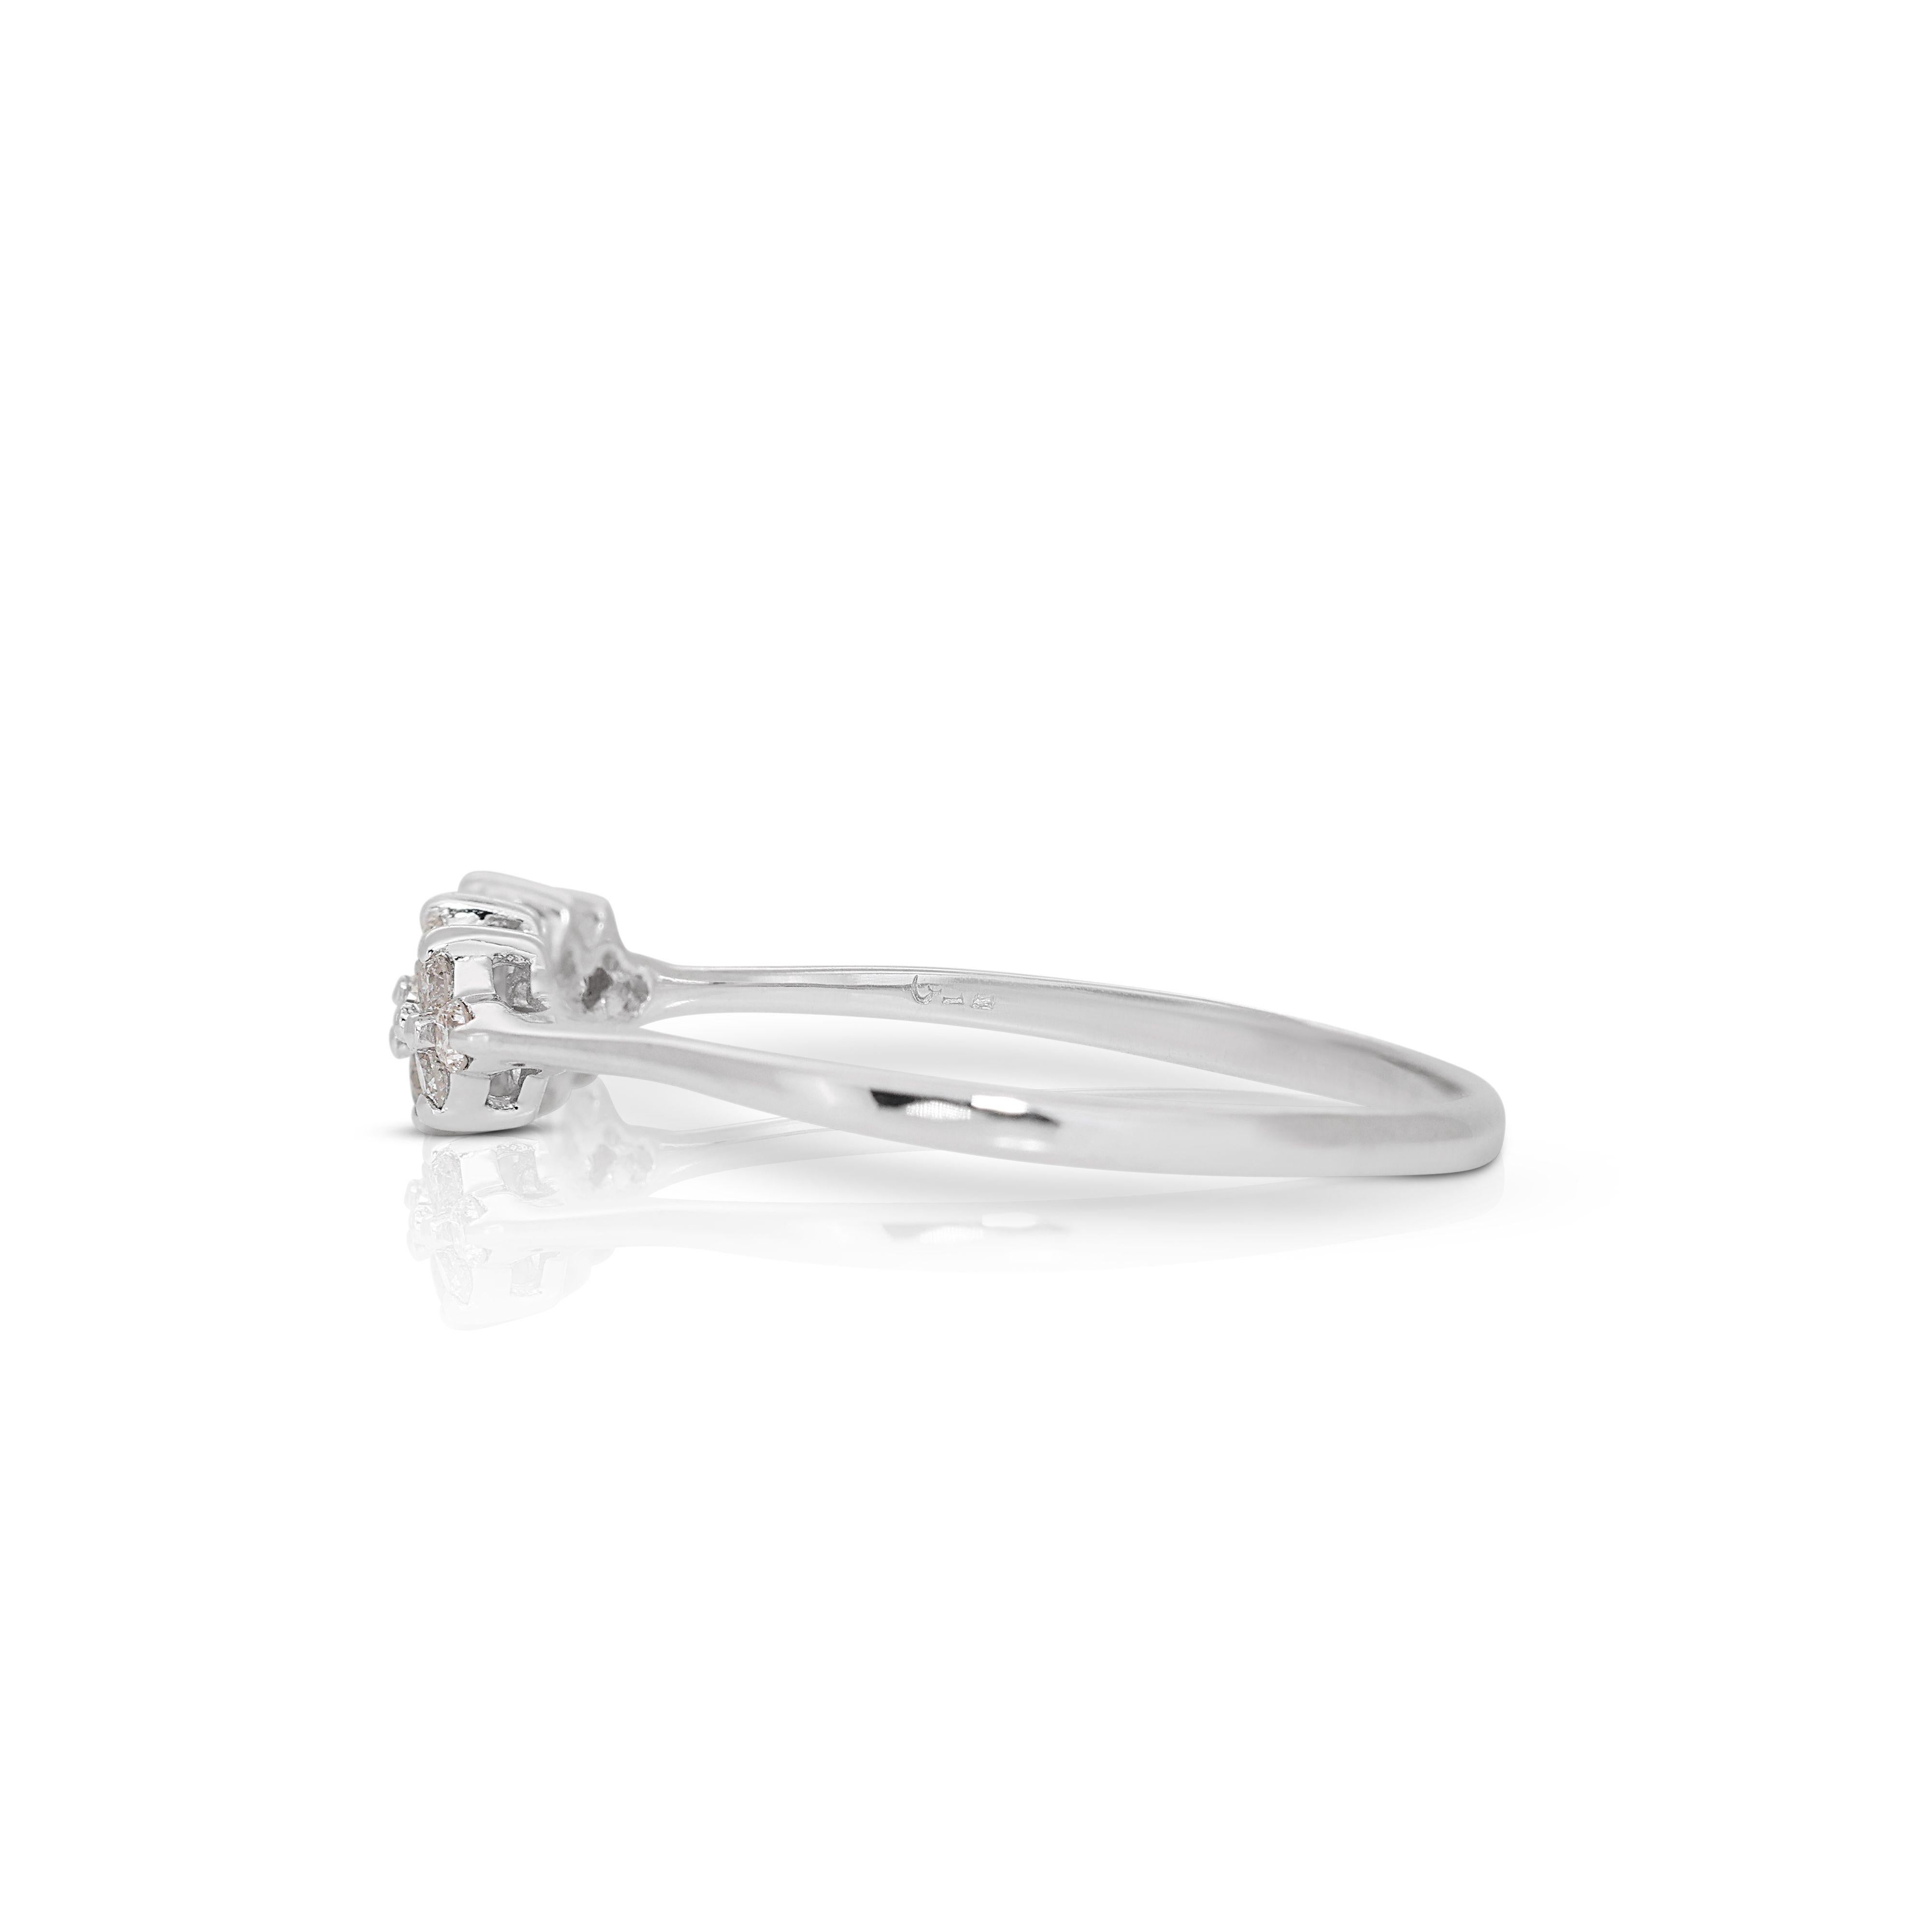 Round Cut Exquisite 18K White Gold Diamond Ring with 0.20ct Natural Diamond For Sale